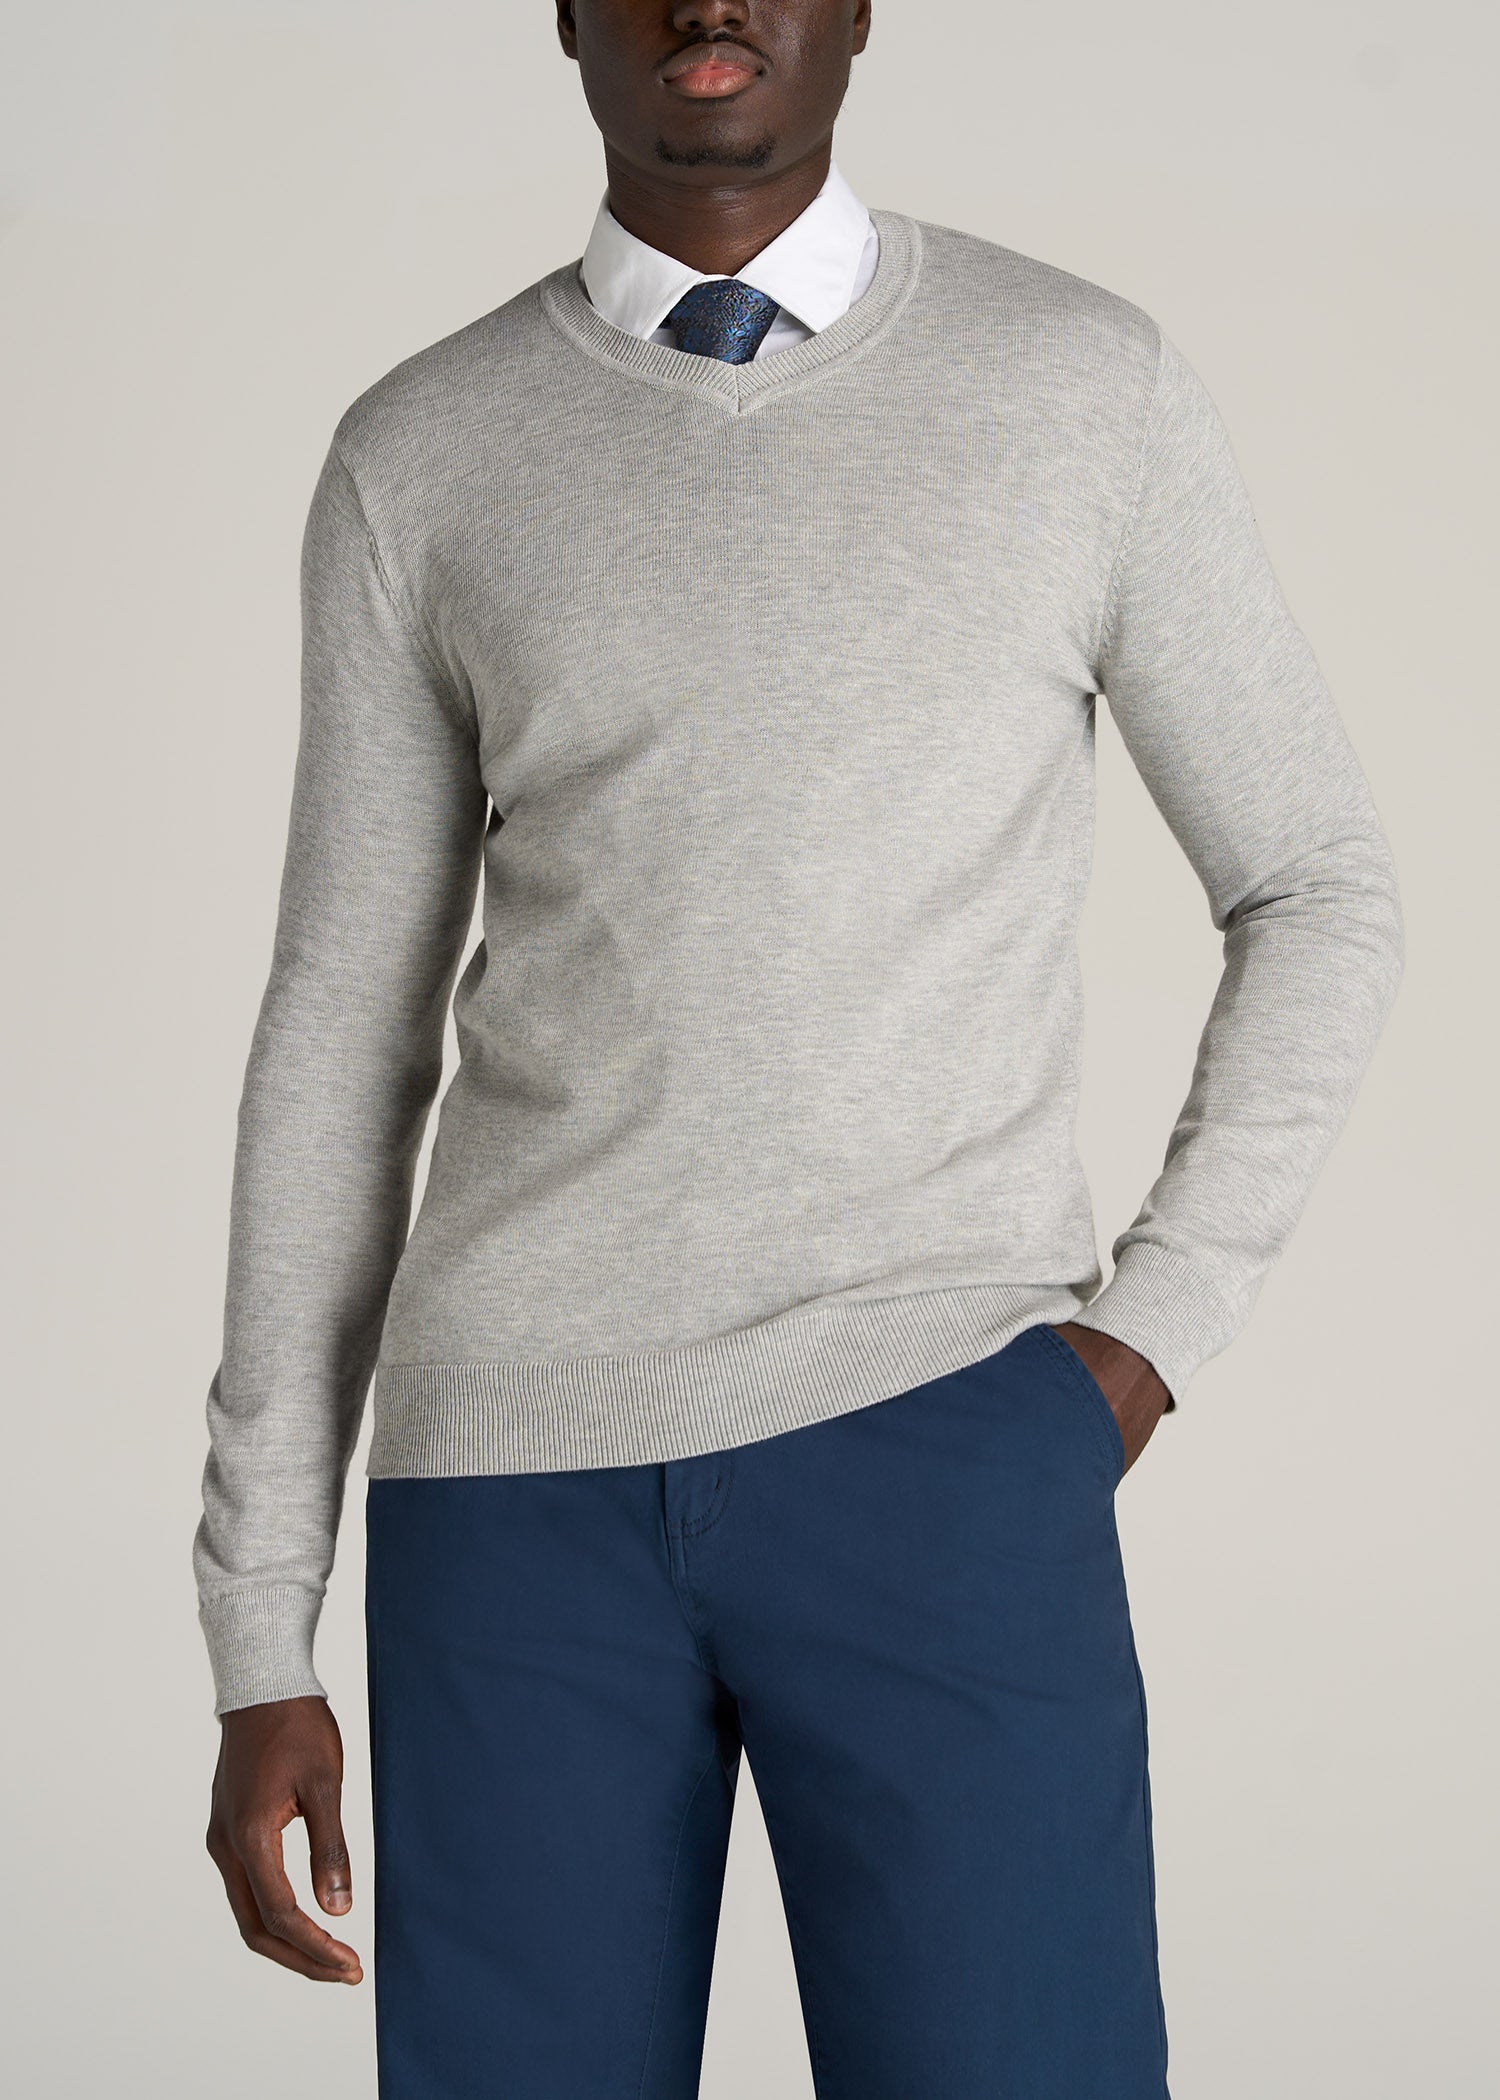 Everyday V-Neck Tall Men's Sweater in Grey Mix